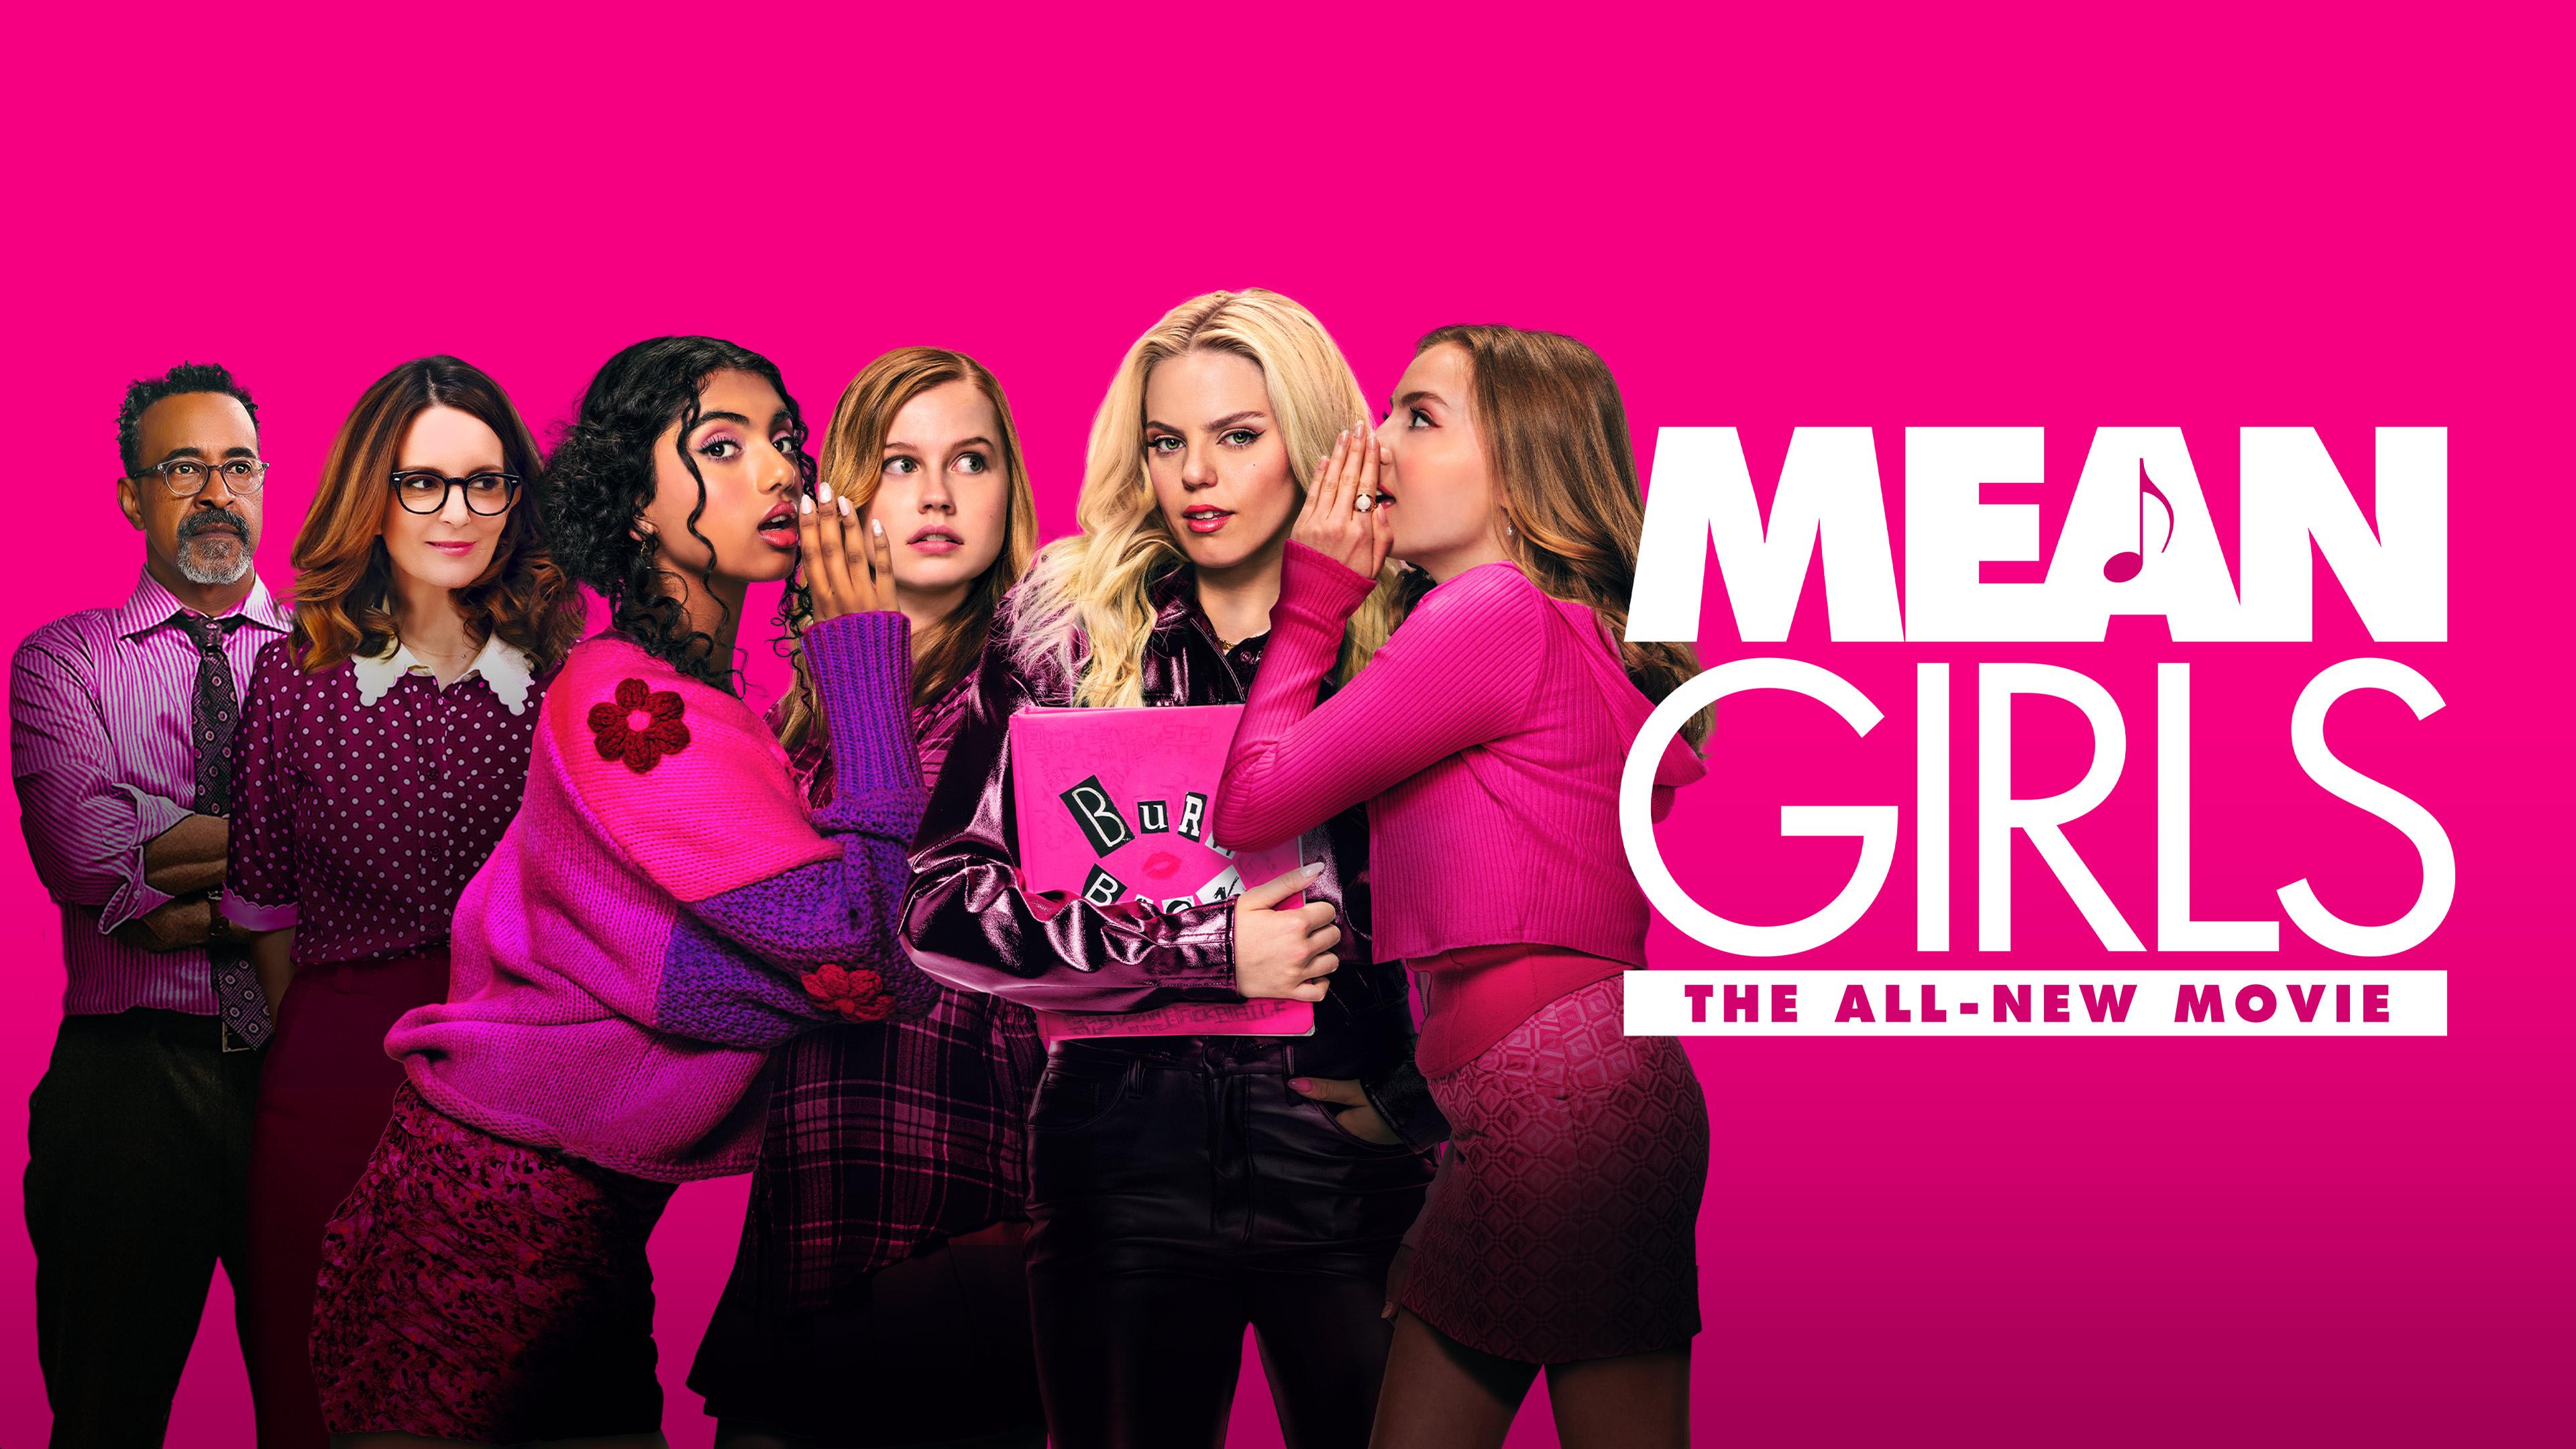 Watch Mean Girls Streaming Online on Philo (Free Trial)